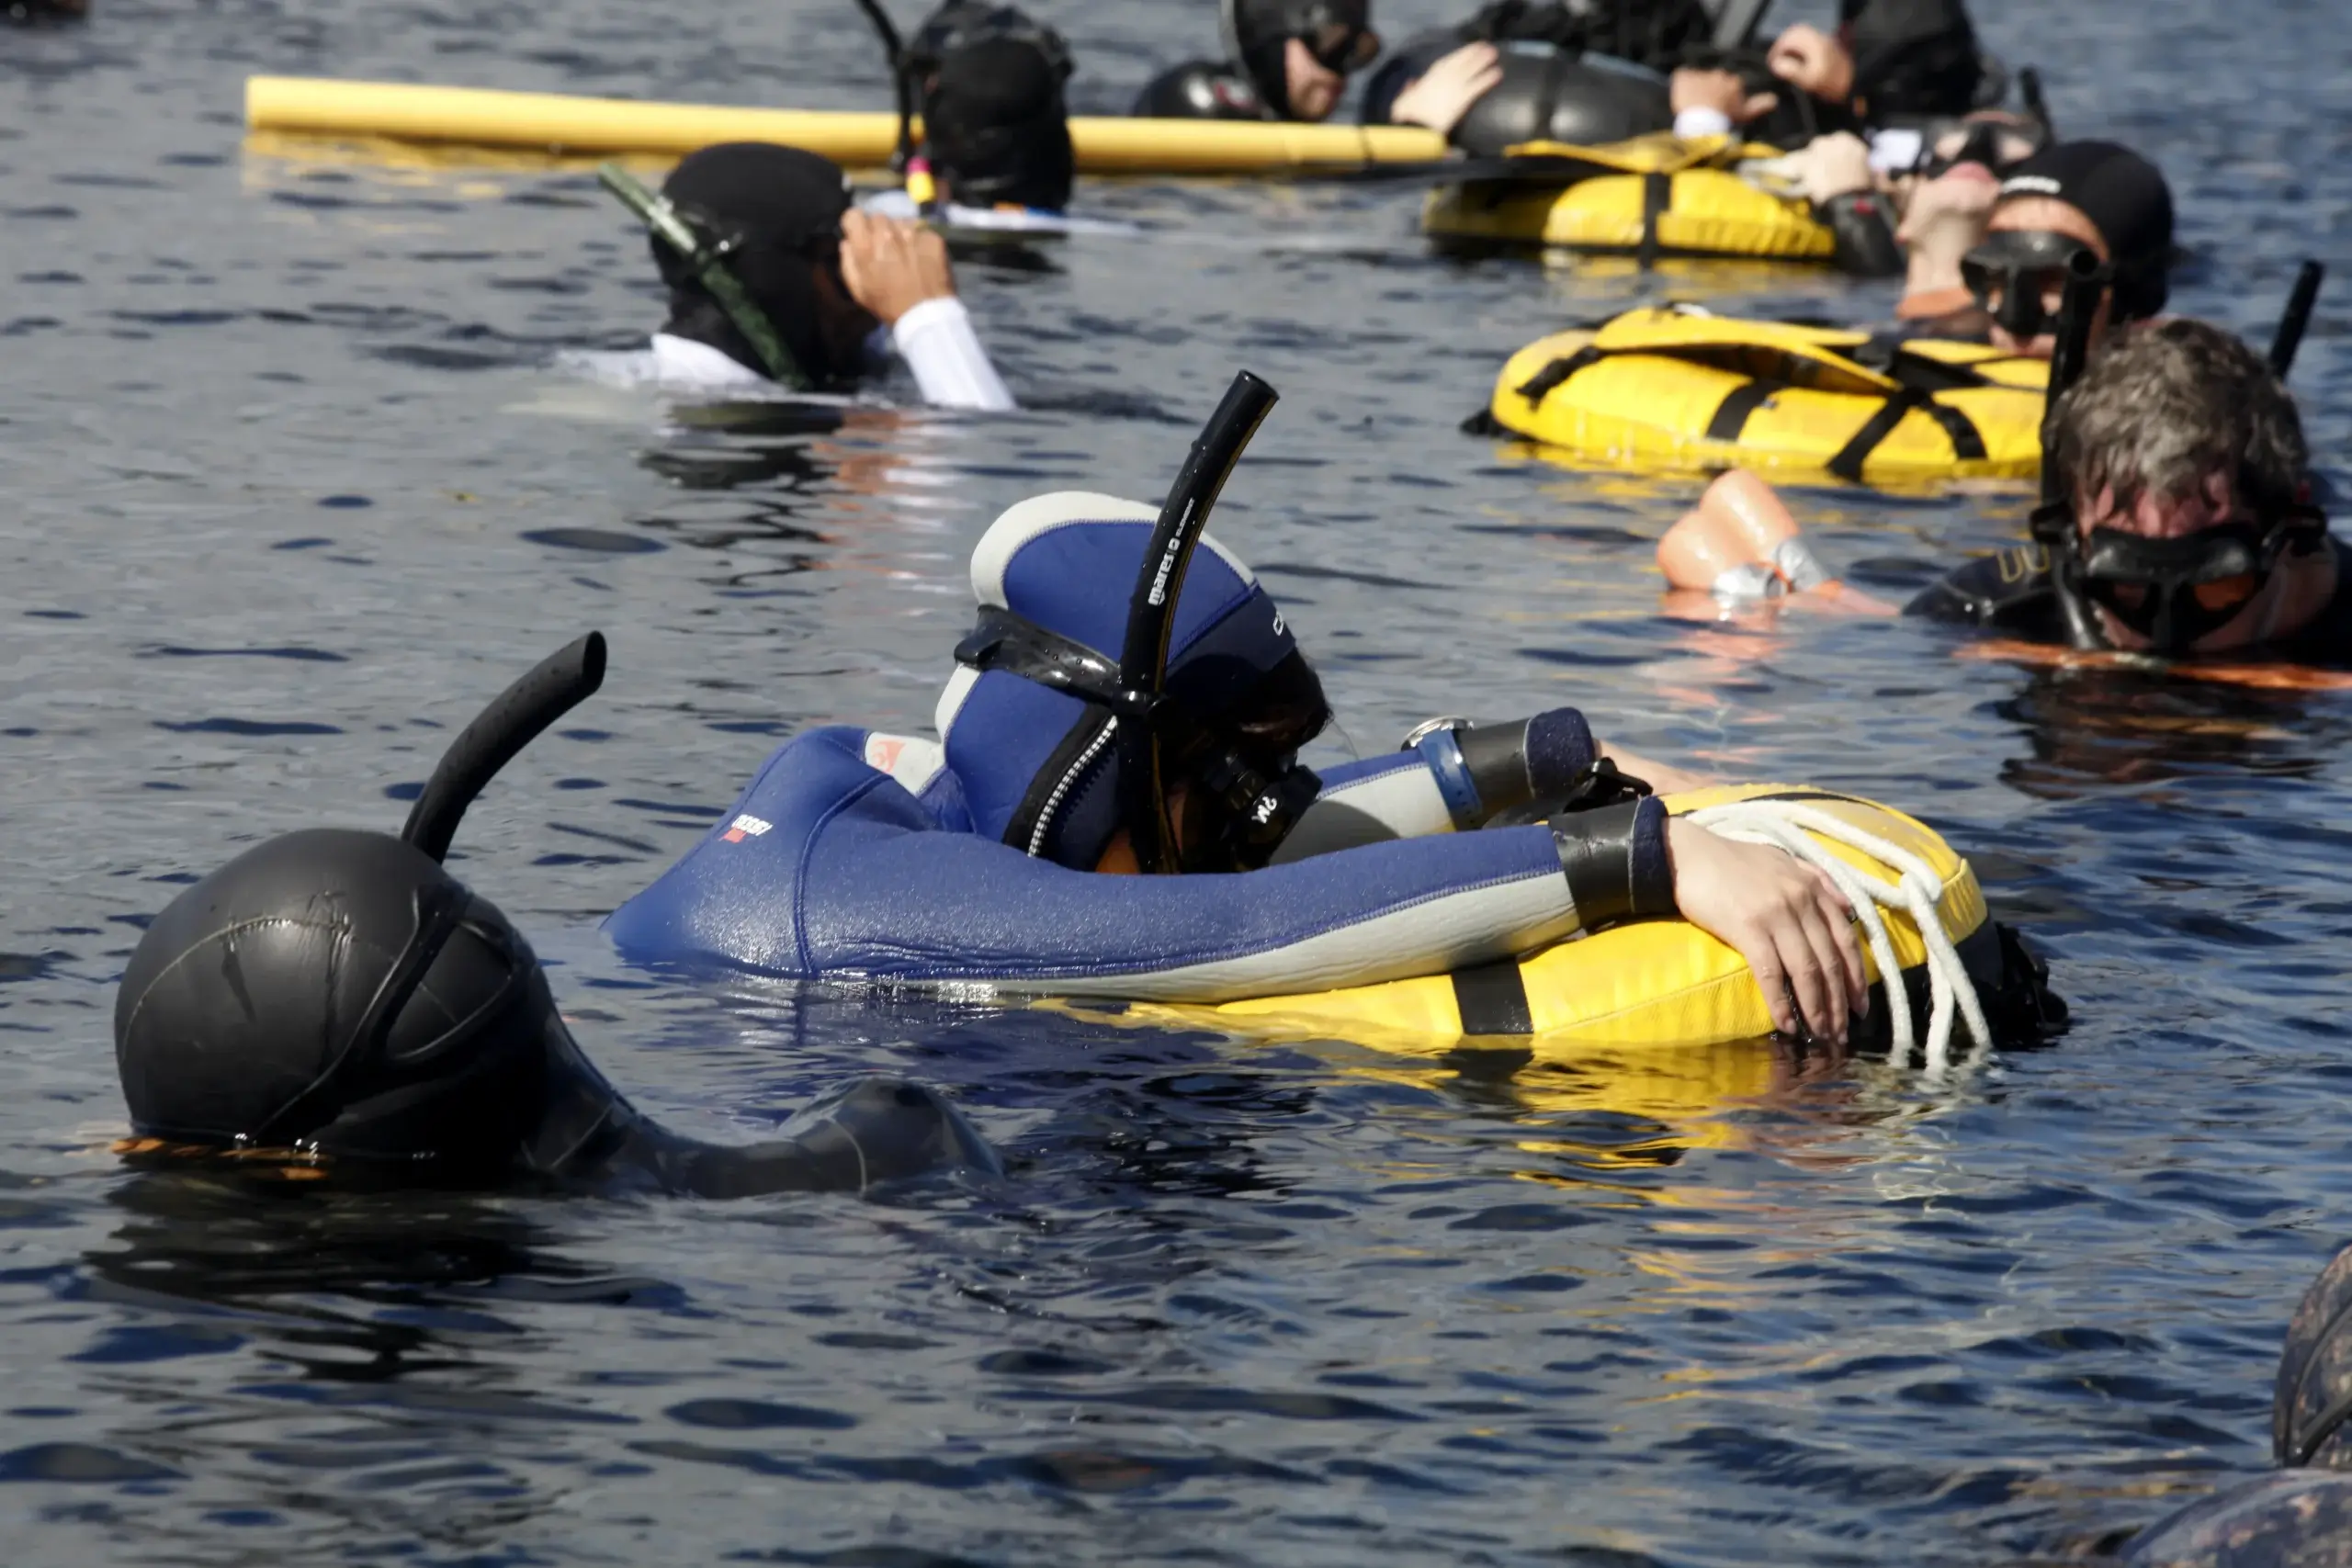 Scuba divers in wet suits and snorkeling gear floating on the surface of water during a training session.